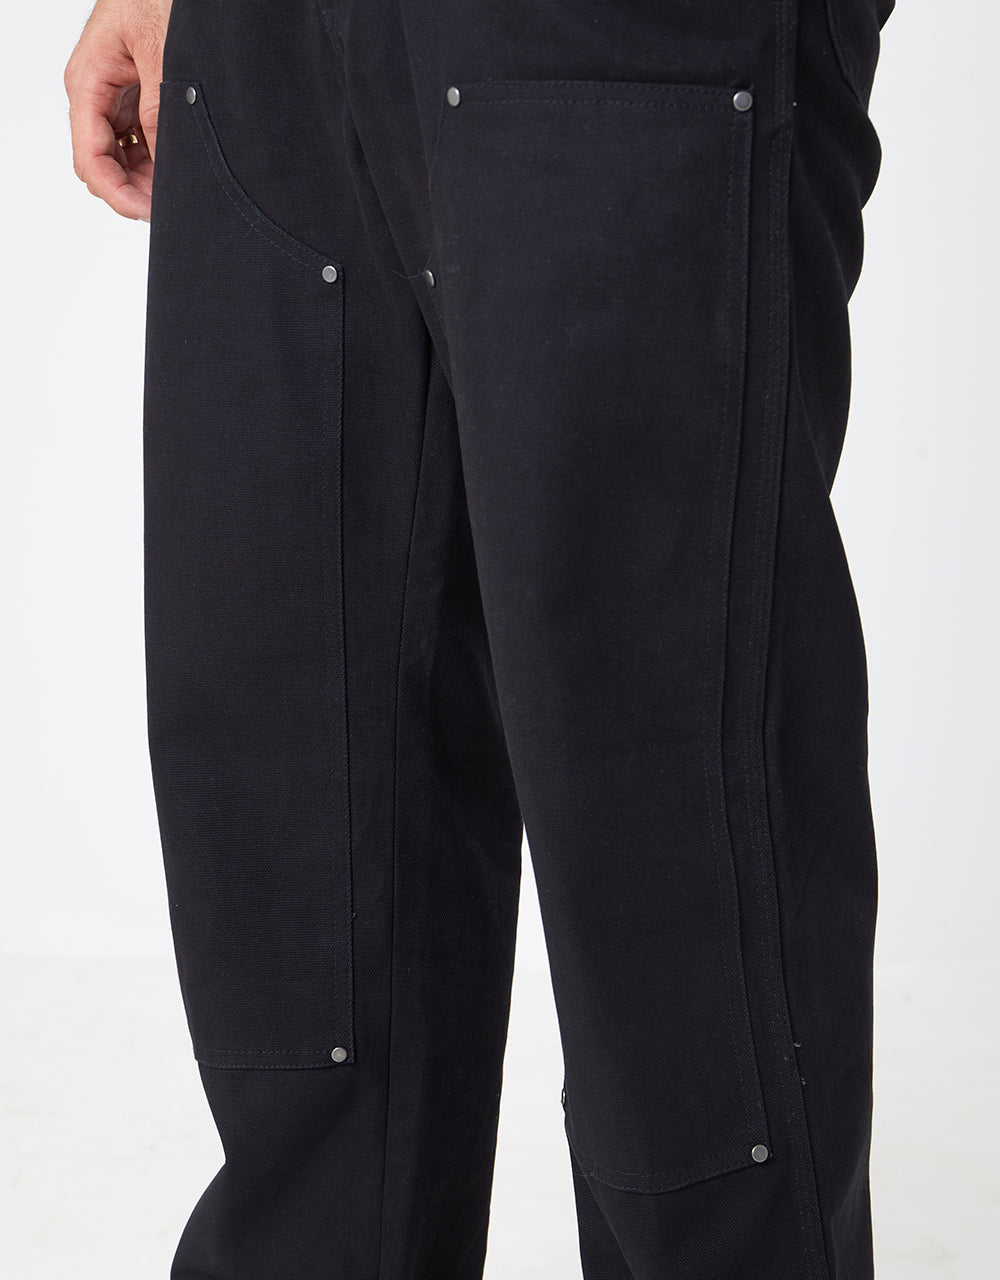 Dickies Duck Canvas Utility Pant - Stone Washed Black